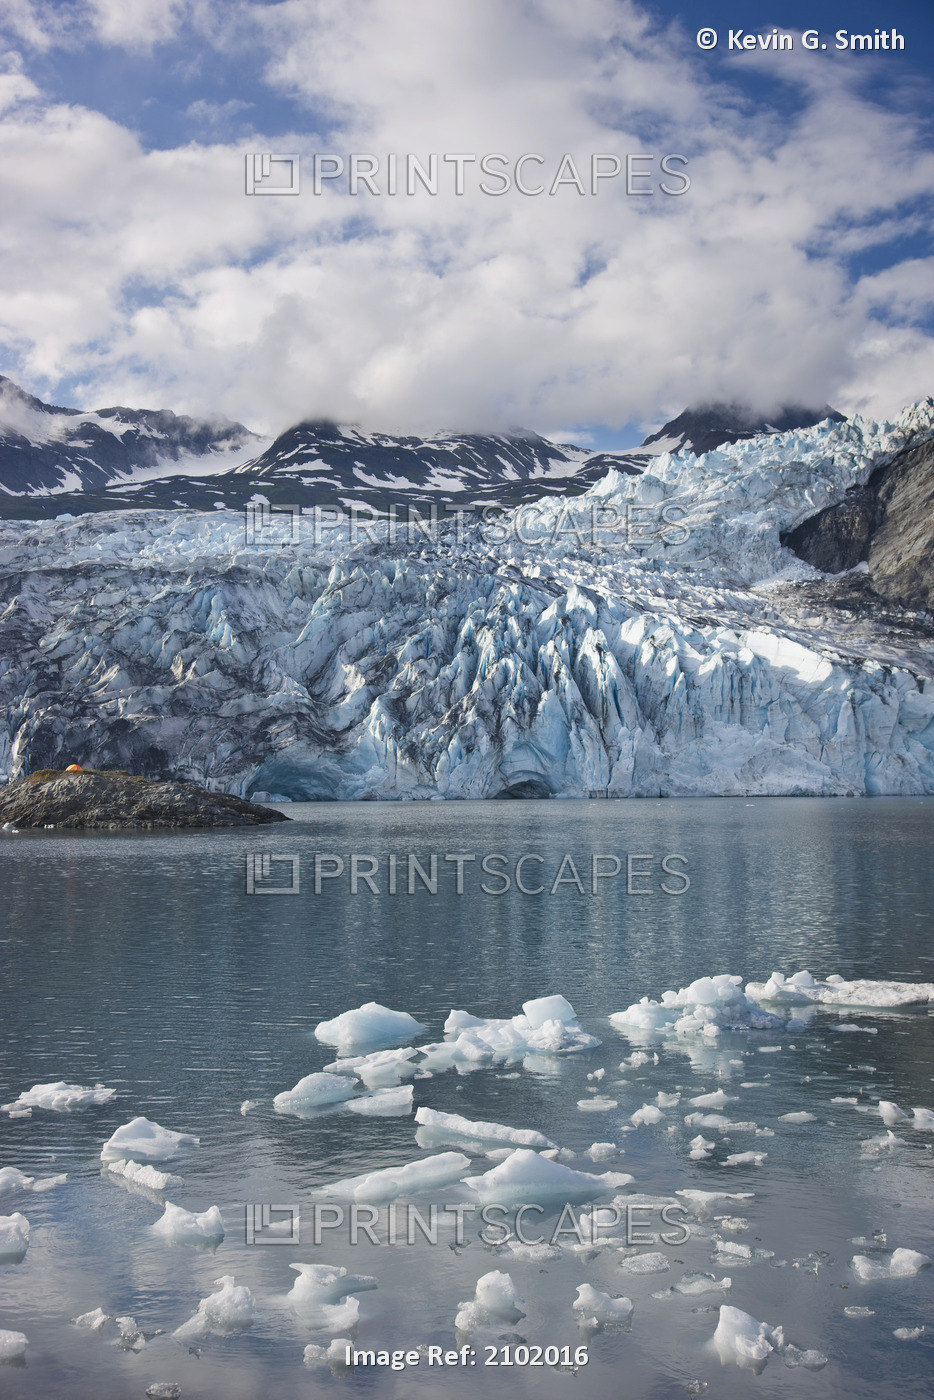 Scenic View Of Shoup Glacier With A Camp Tent Set On A Island In The Distance, ...